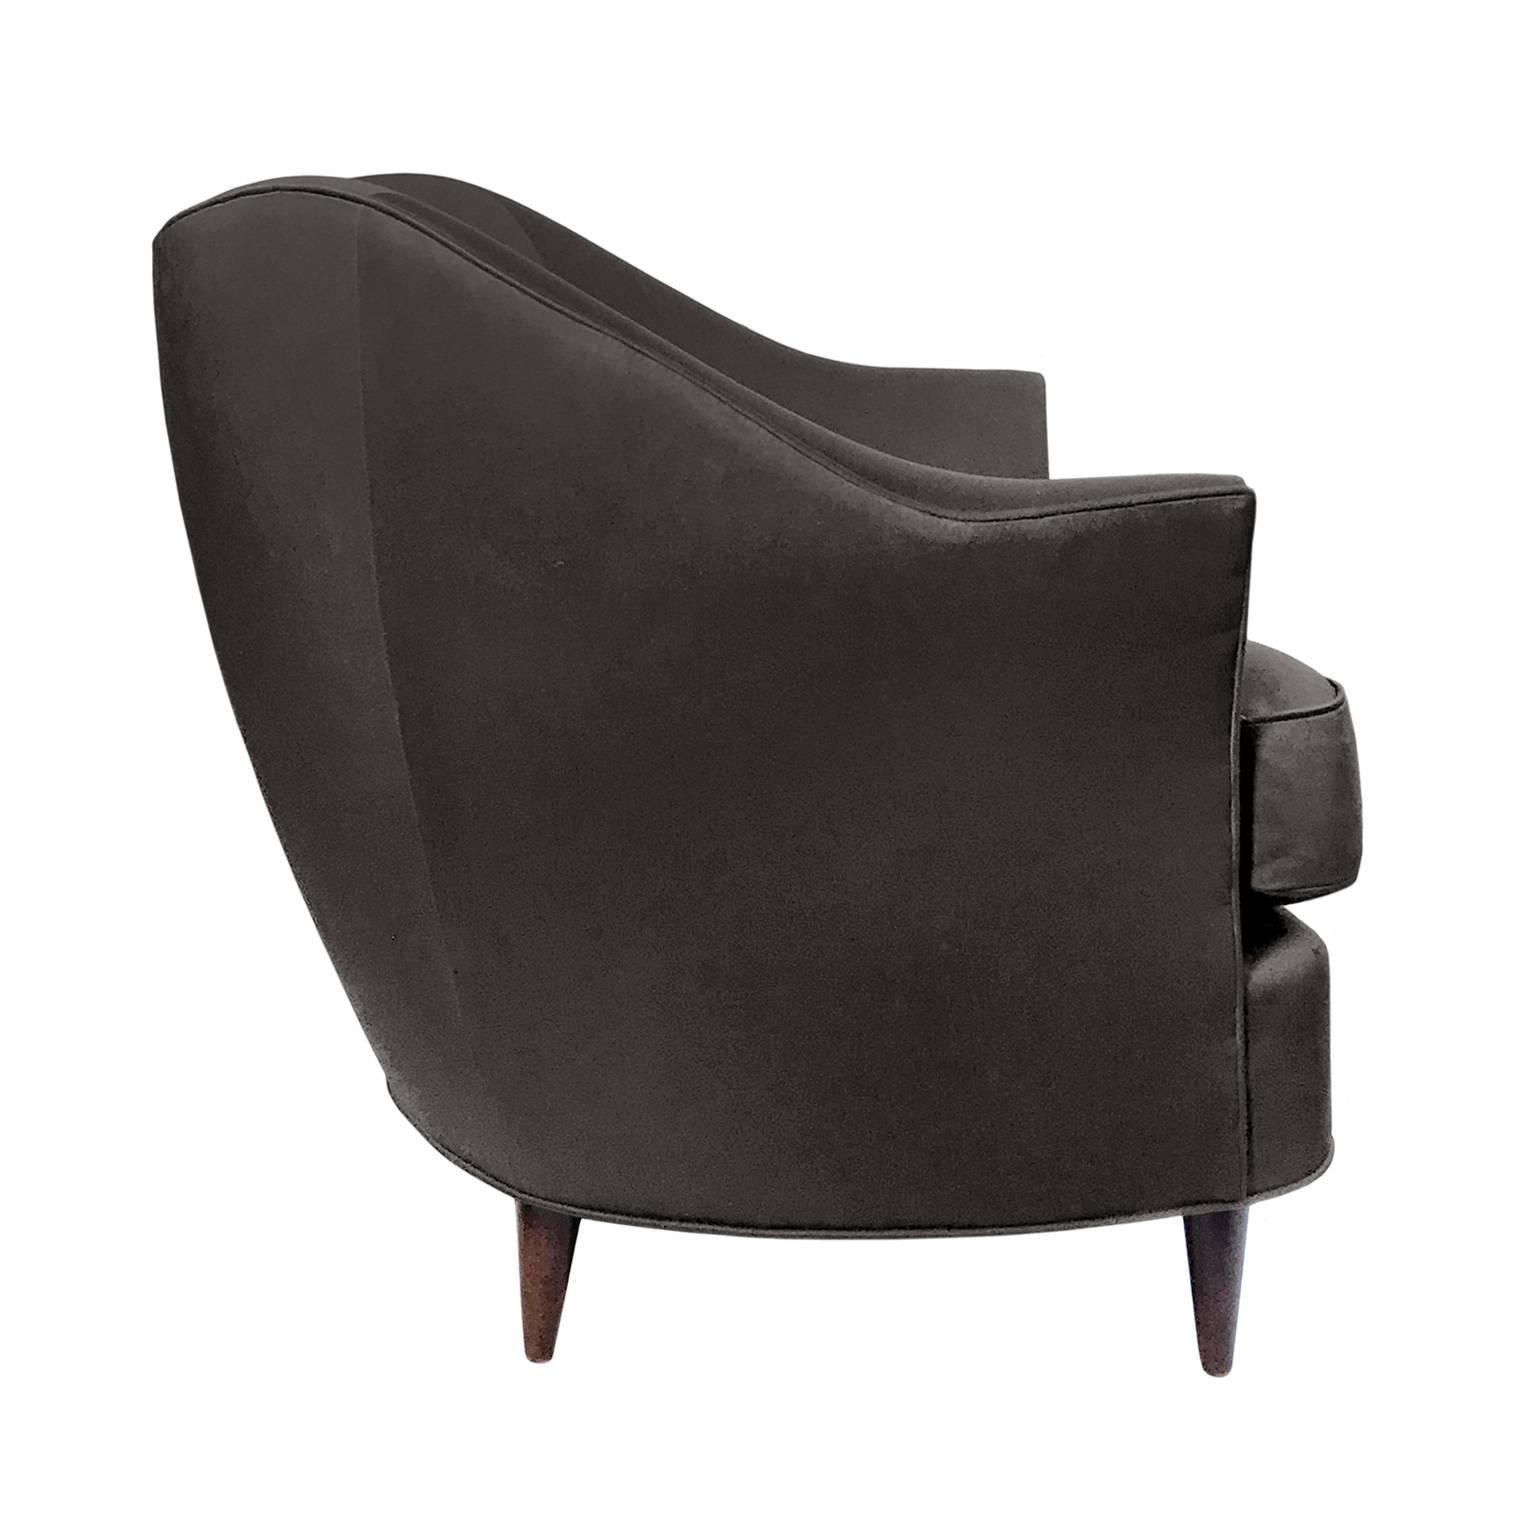 Flair Home collection custom Gio curved back armchair in deep brown satin.